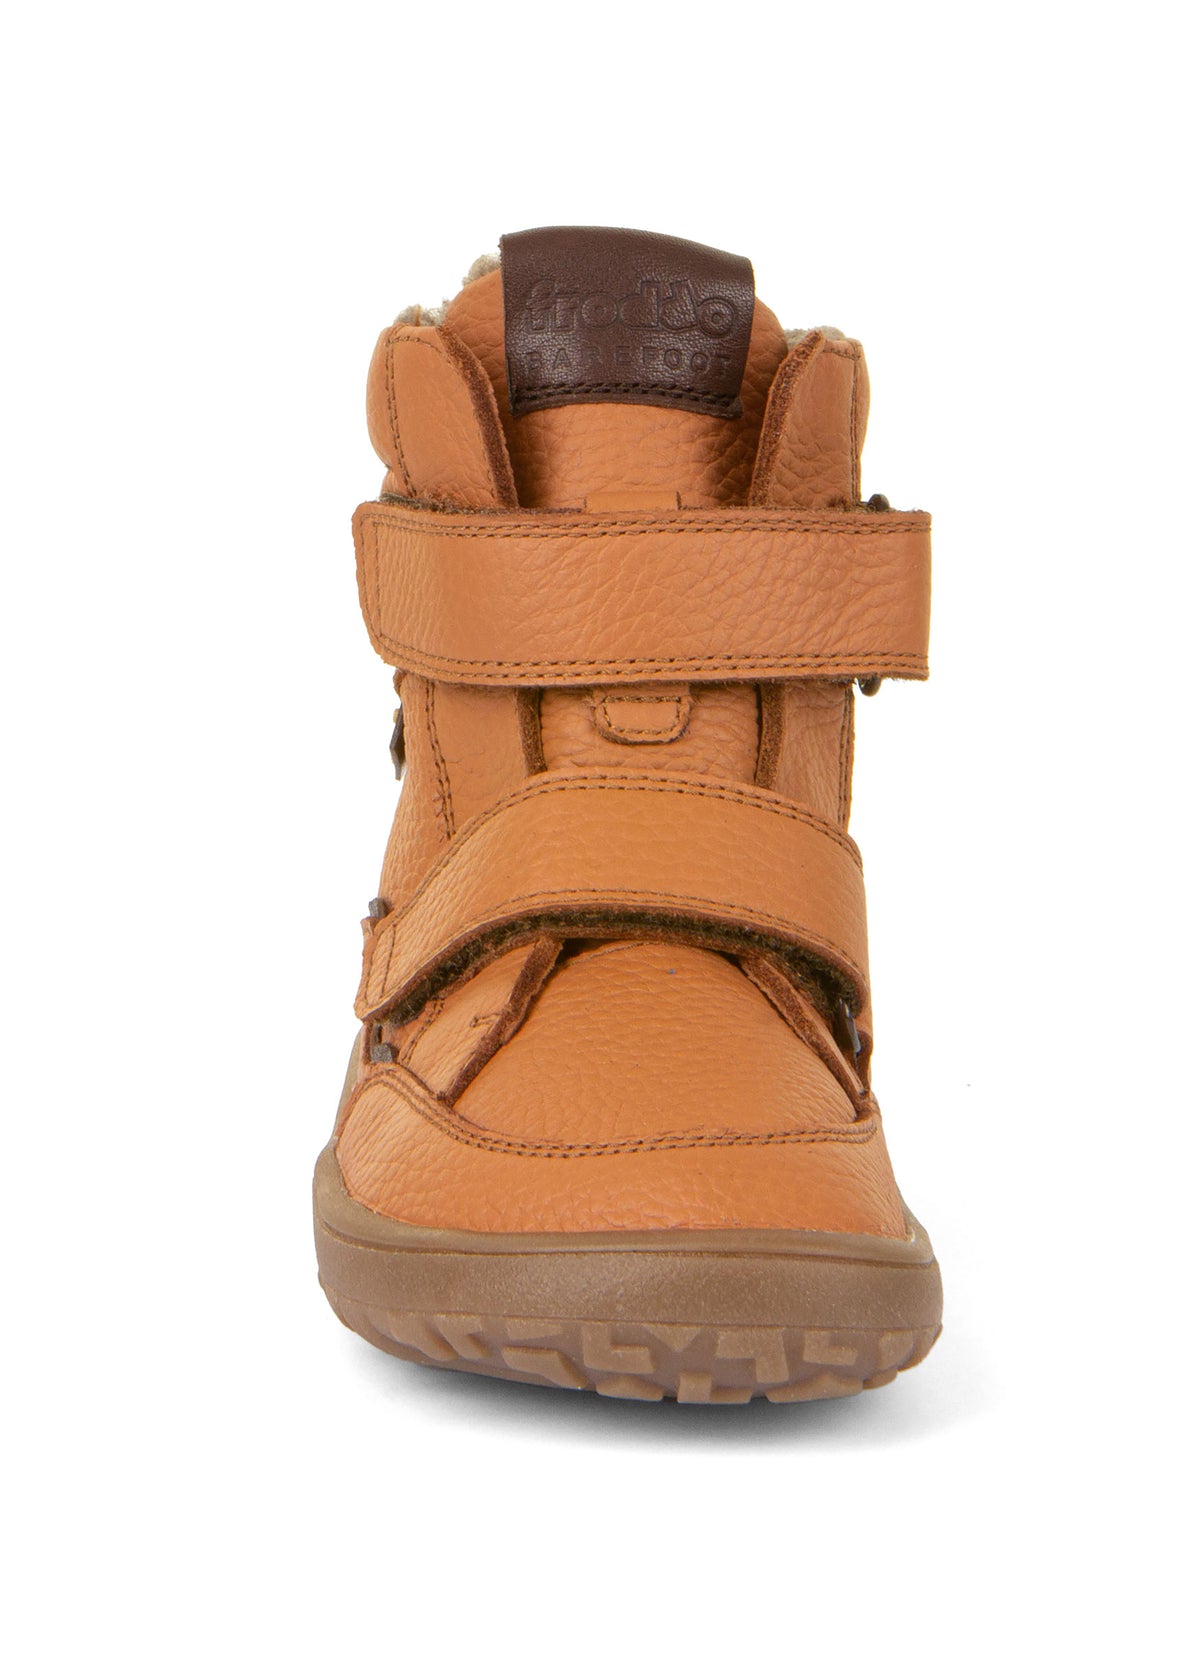 Children's barefoot shoes - leather winter shoes, TEX Winter, cognac brown